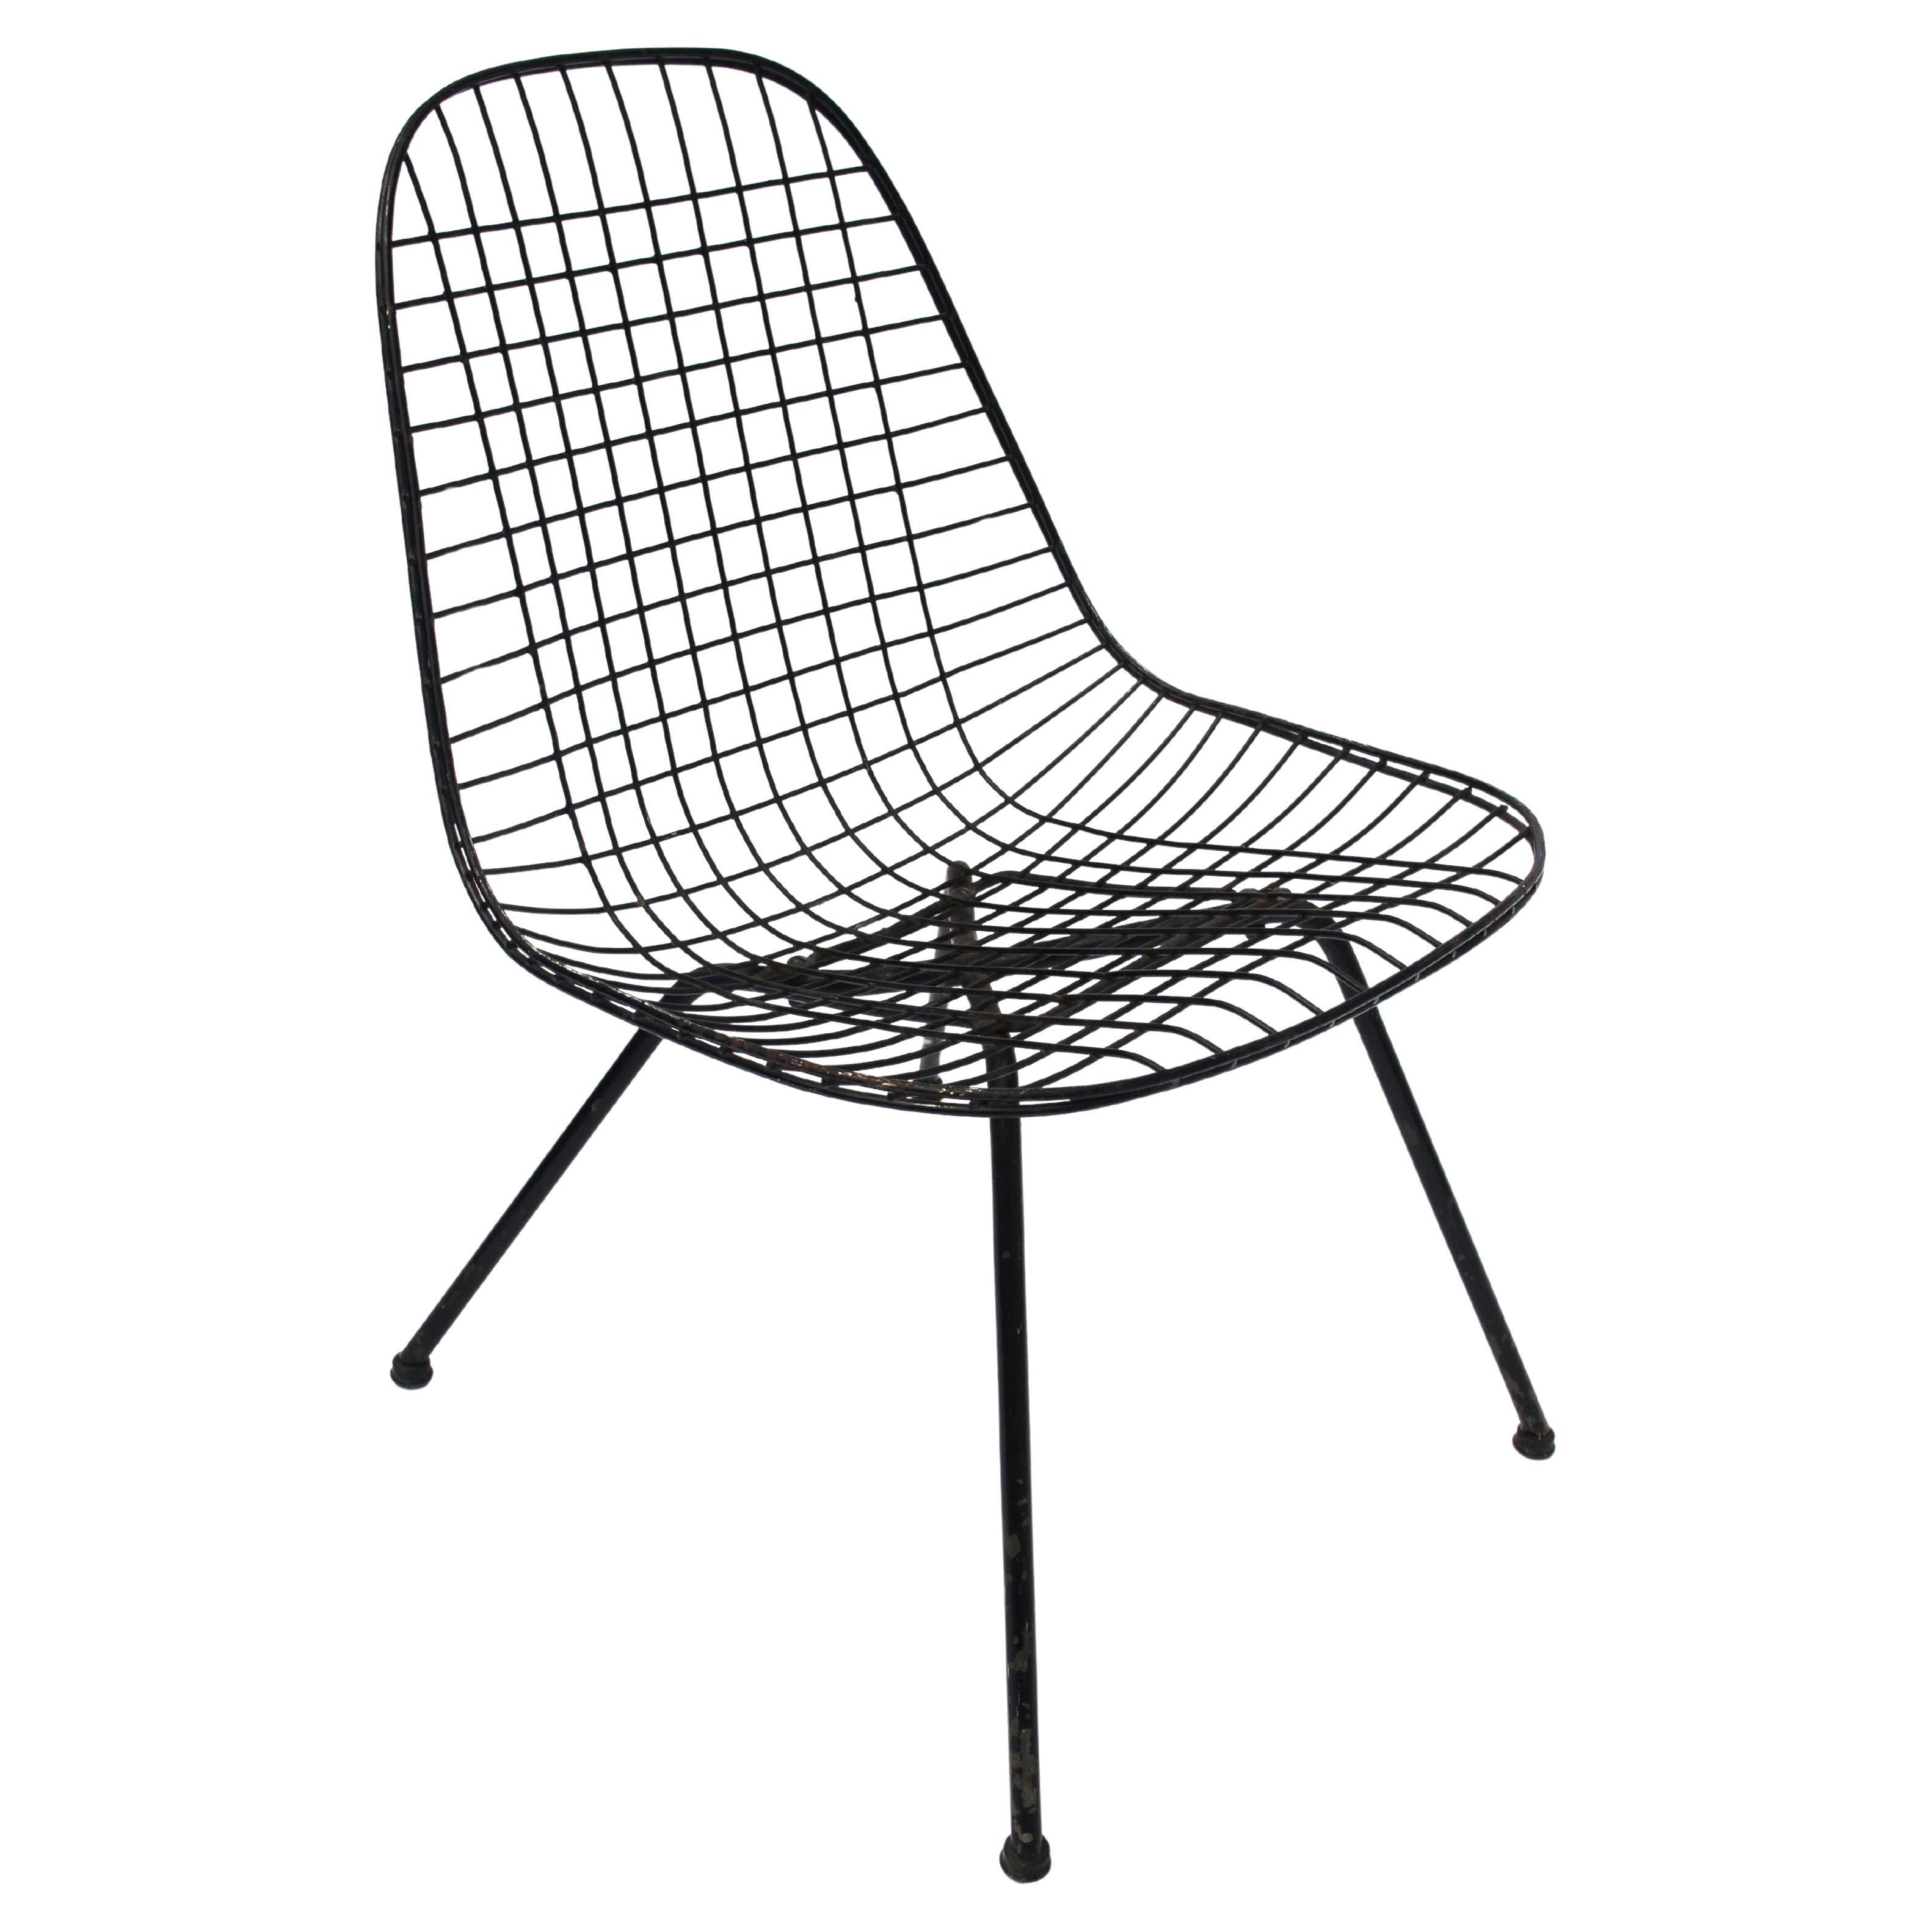 How do I identify a Herman Miller chair?